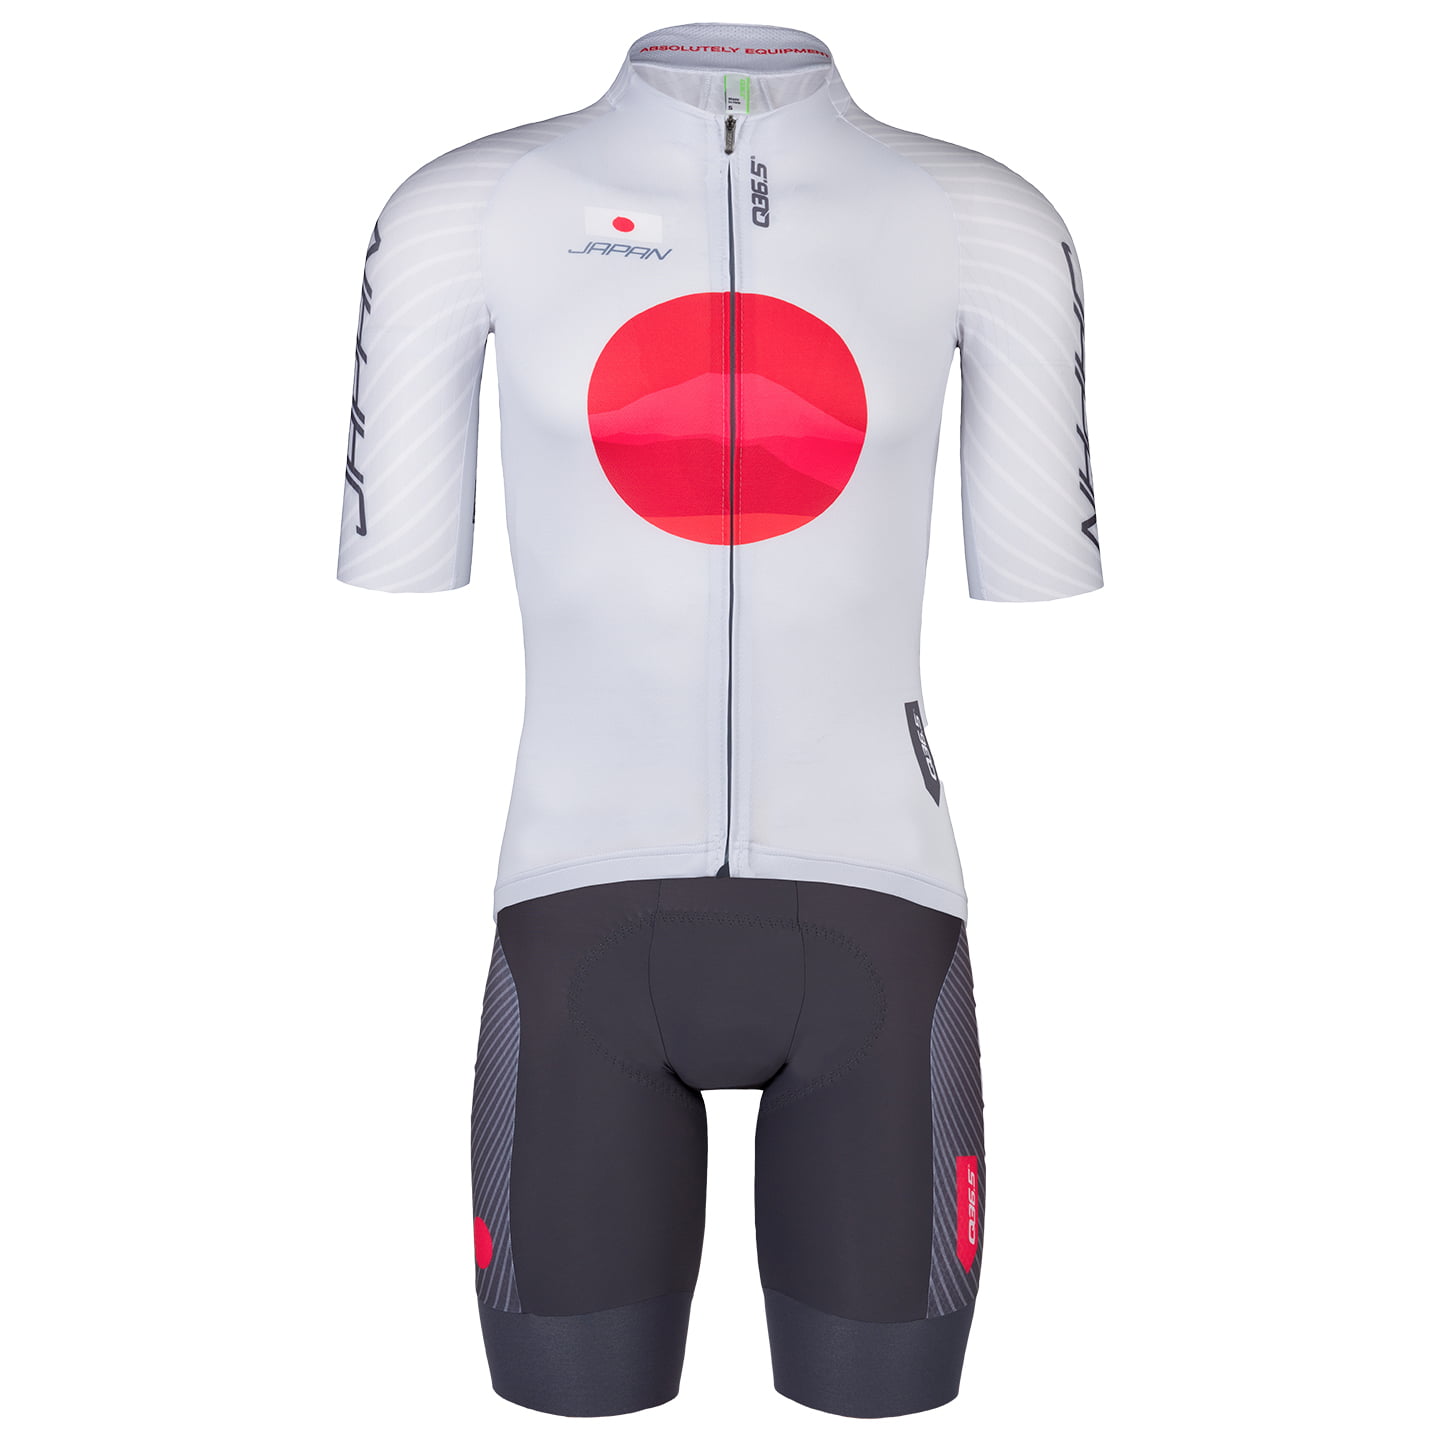 Q36.5 JAPANESE NATIONAL TEAM Set (cycling jersey + cycling shorts) Set (2 pieces), for men, Cycling clothing